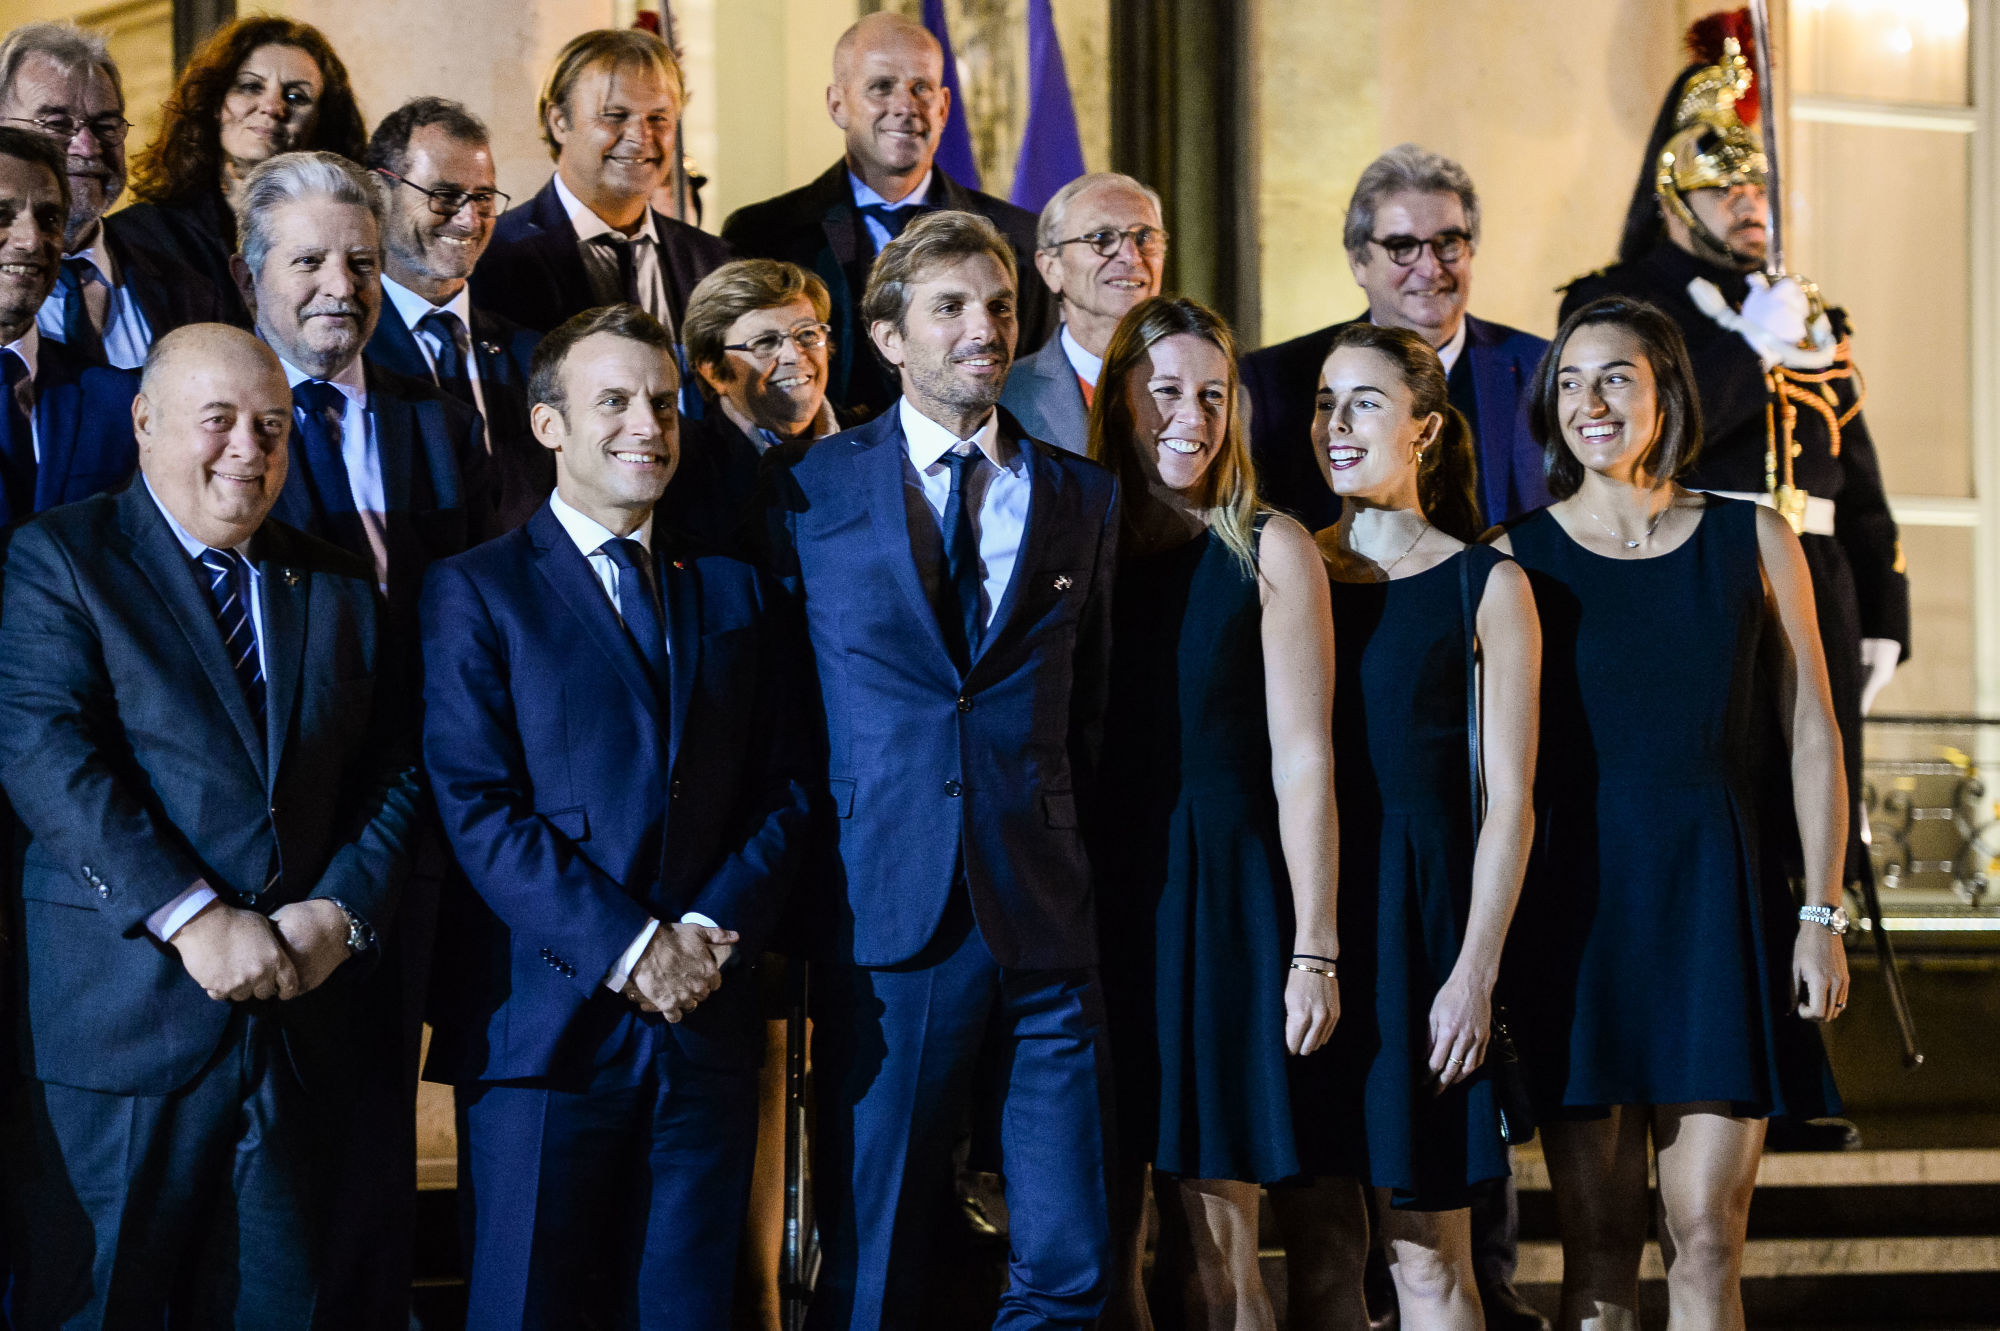 Bernard GIUDICELLI President of the French Tennis Federation, Emmanuel MACRON, President of the French Republic, Julien BENNETEAU Capitain of France, Pauline PARMENTIER of France, Alize CORNET of France and Caroline GARCIA of France during the reception at the Elysee Palace in honor of the French Womens Tennis Team who won the FED Cup on November 12, 2019 in Paris, France. (Photo by Baptiste Fernandez/Icon Sport) - Caroline GARCIA - Bernard GIUDICELLI - Julien BENNETEAU - Pauline PARMENTIER - Emmanuel MACRON - Palais de l'Elysée - Paris (France)